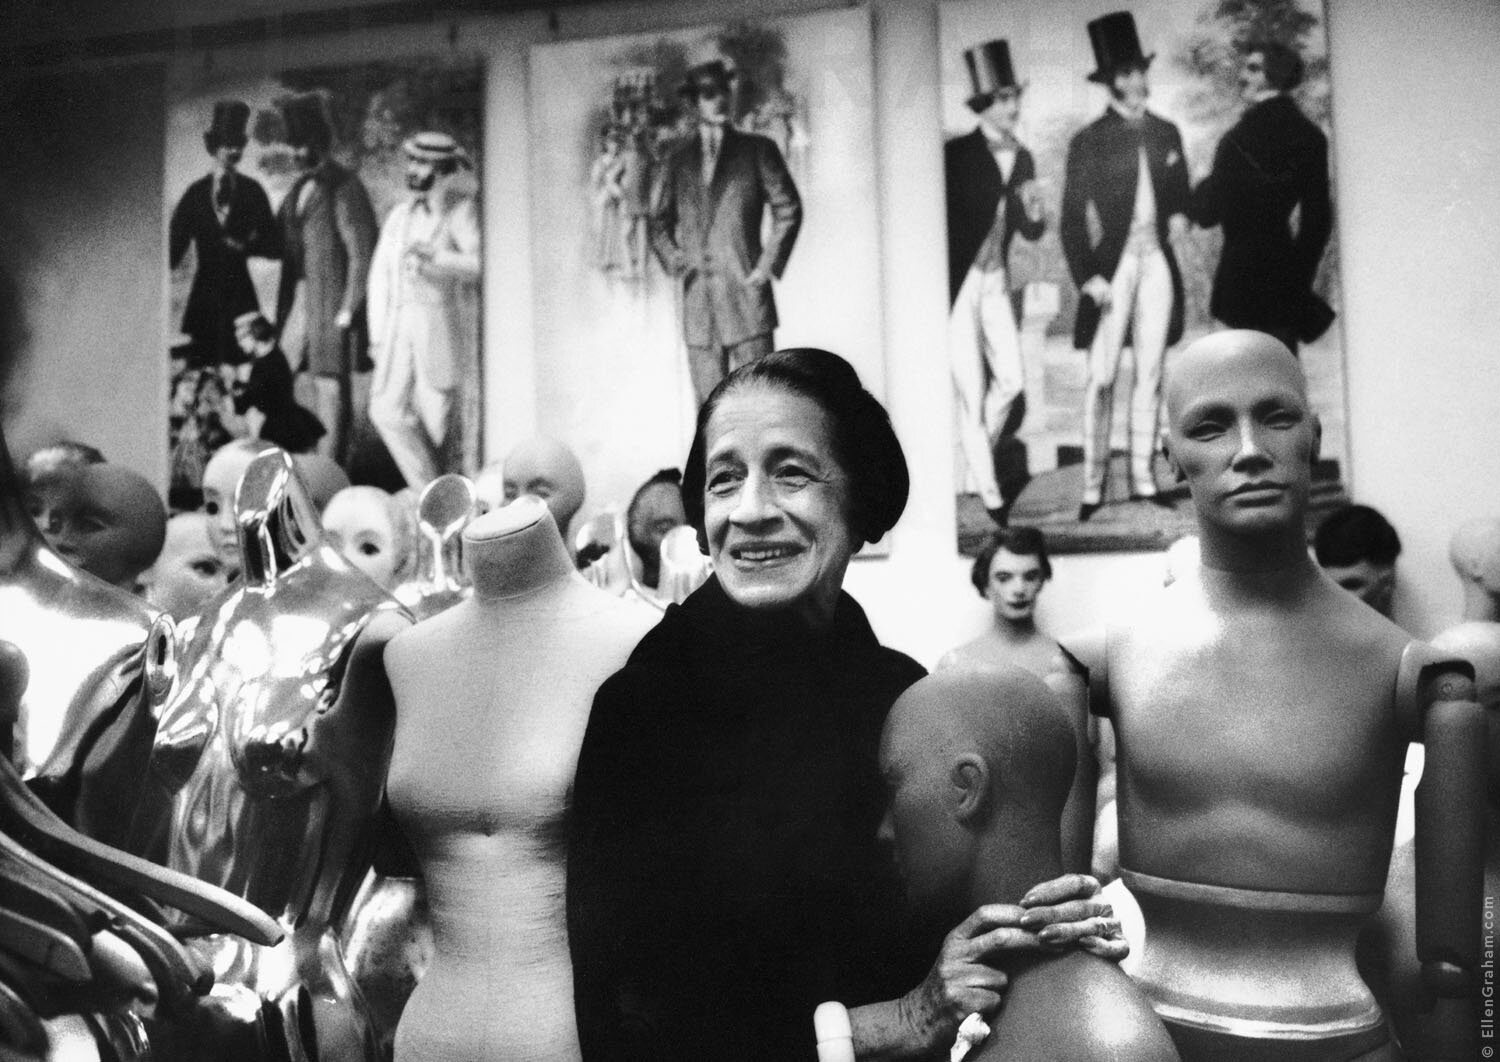 Diana Vreeland, The Costume Institute at The Metropolitan Museum of Art, New York, NY, 1975